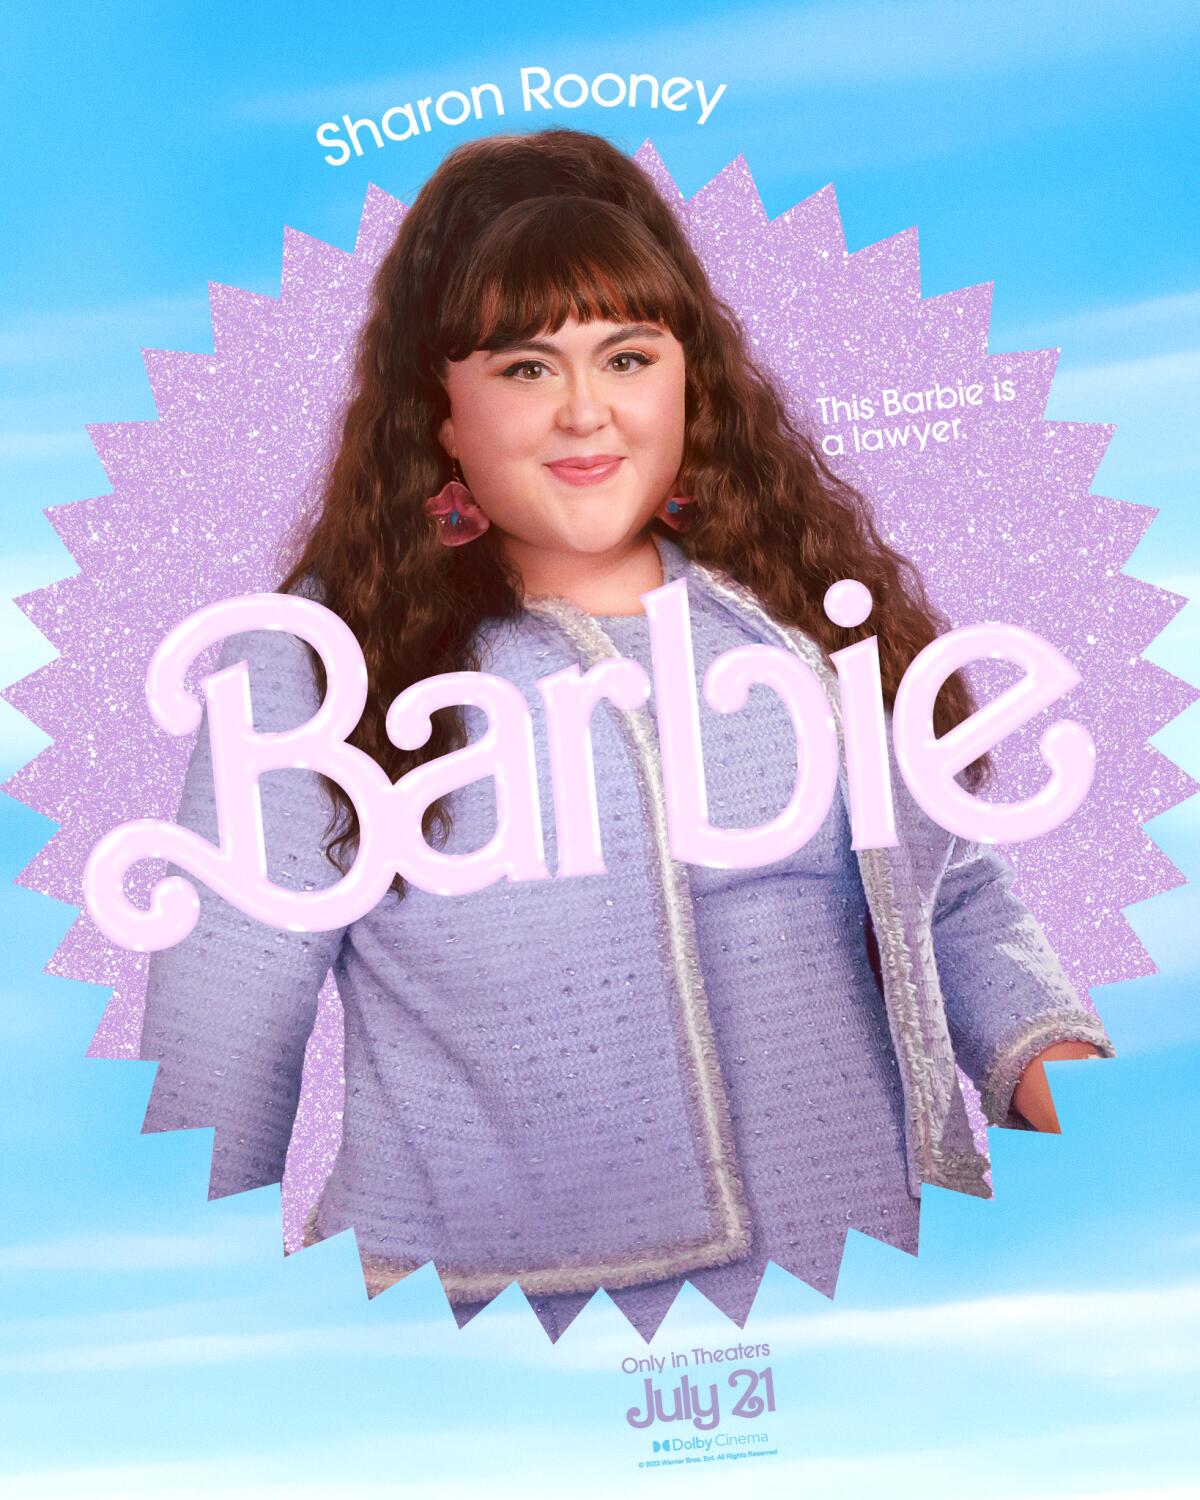 Sharon Rooney poses in a "Barbie" movie poster. She wears a lavender ensemble.